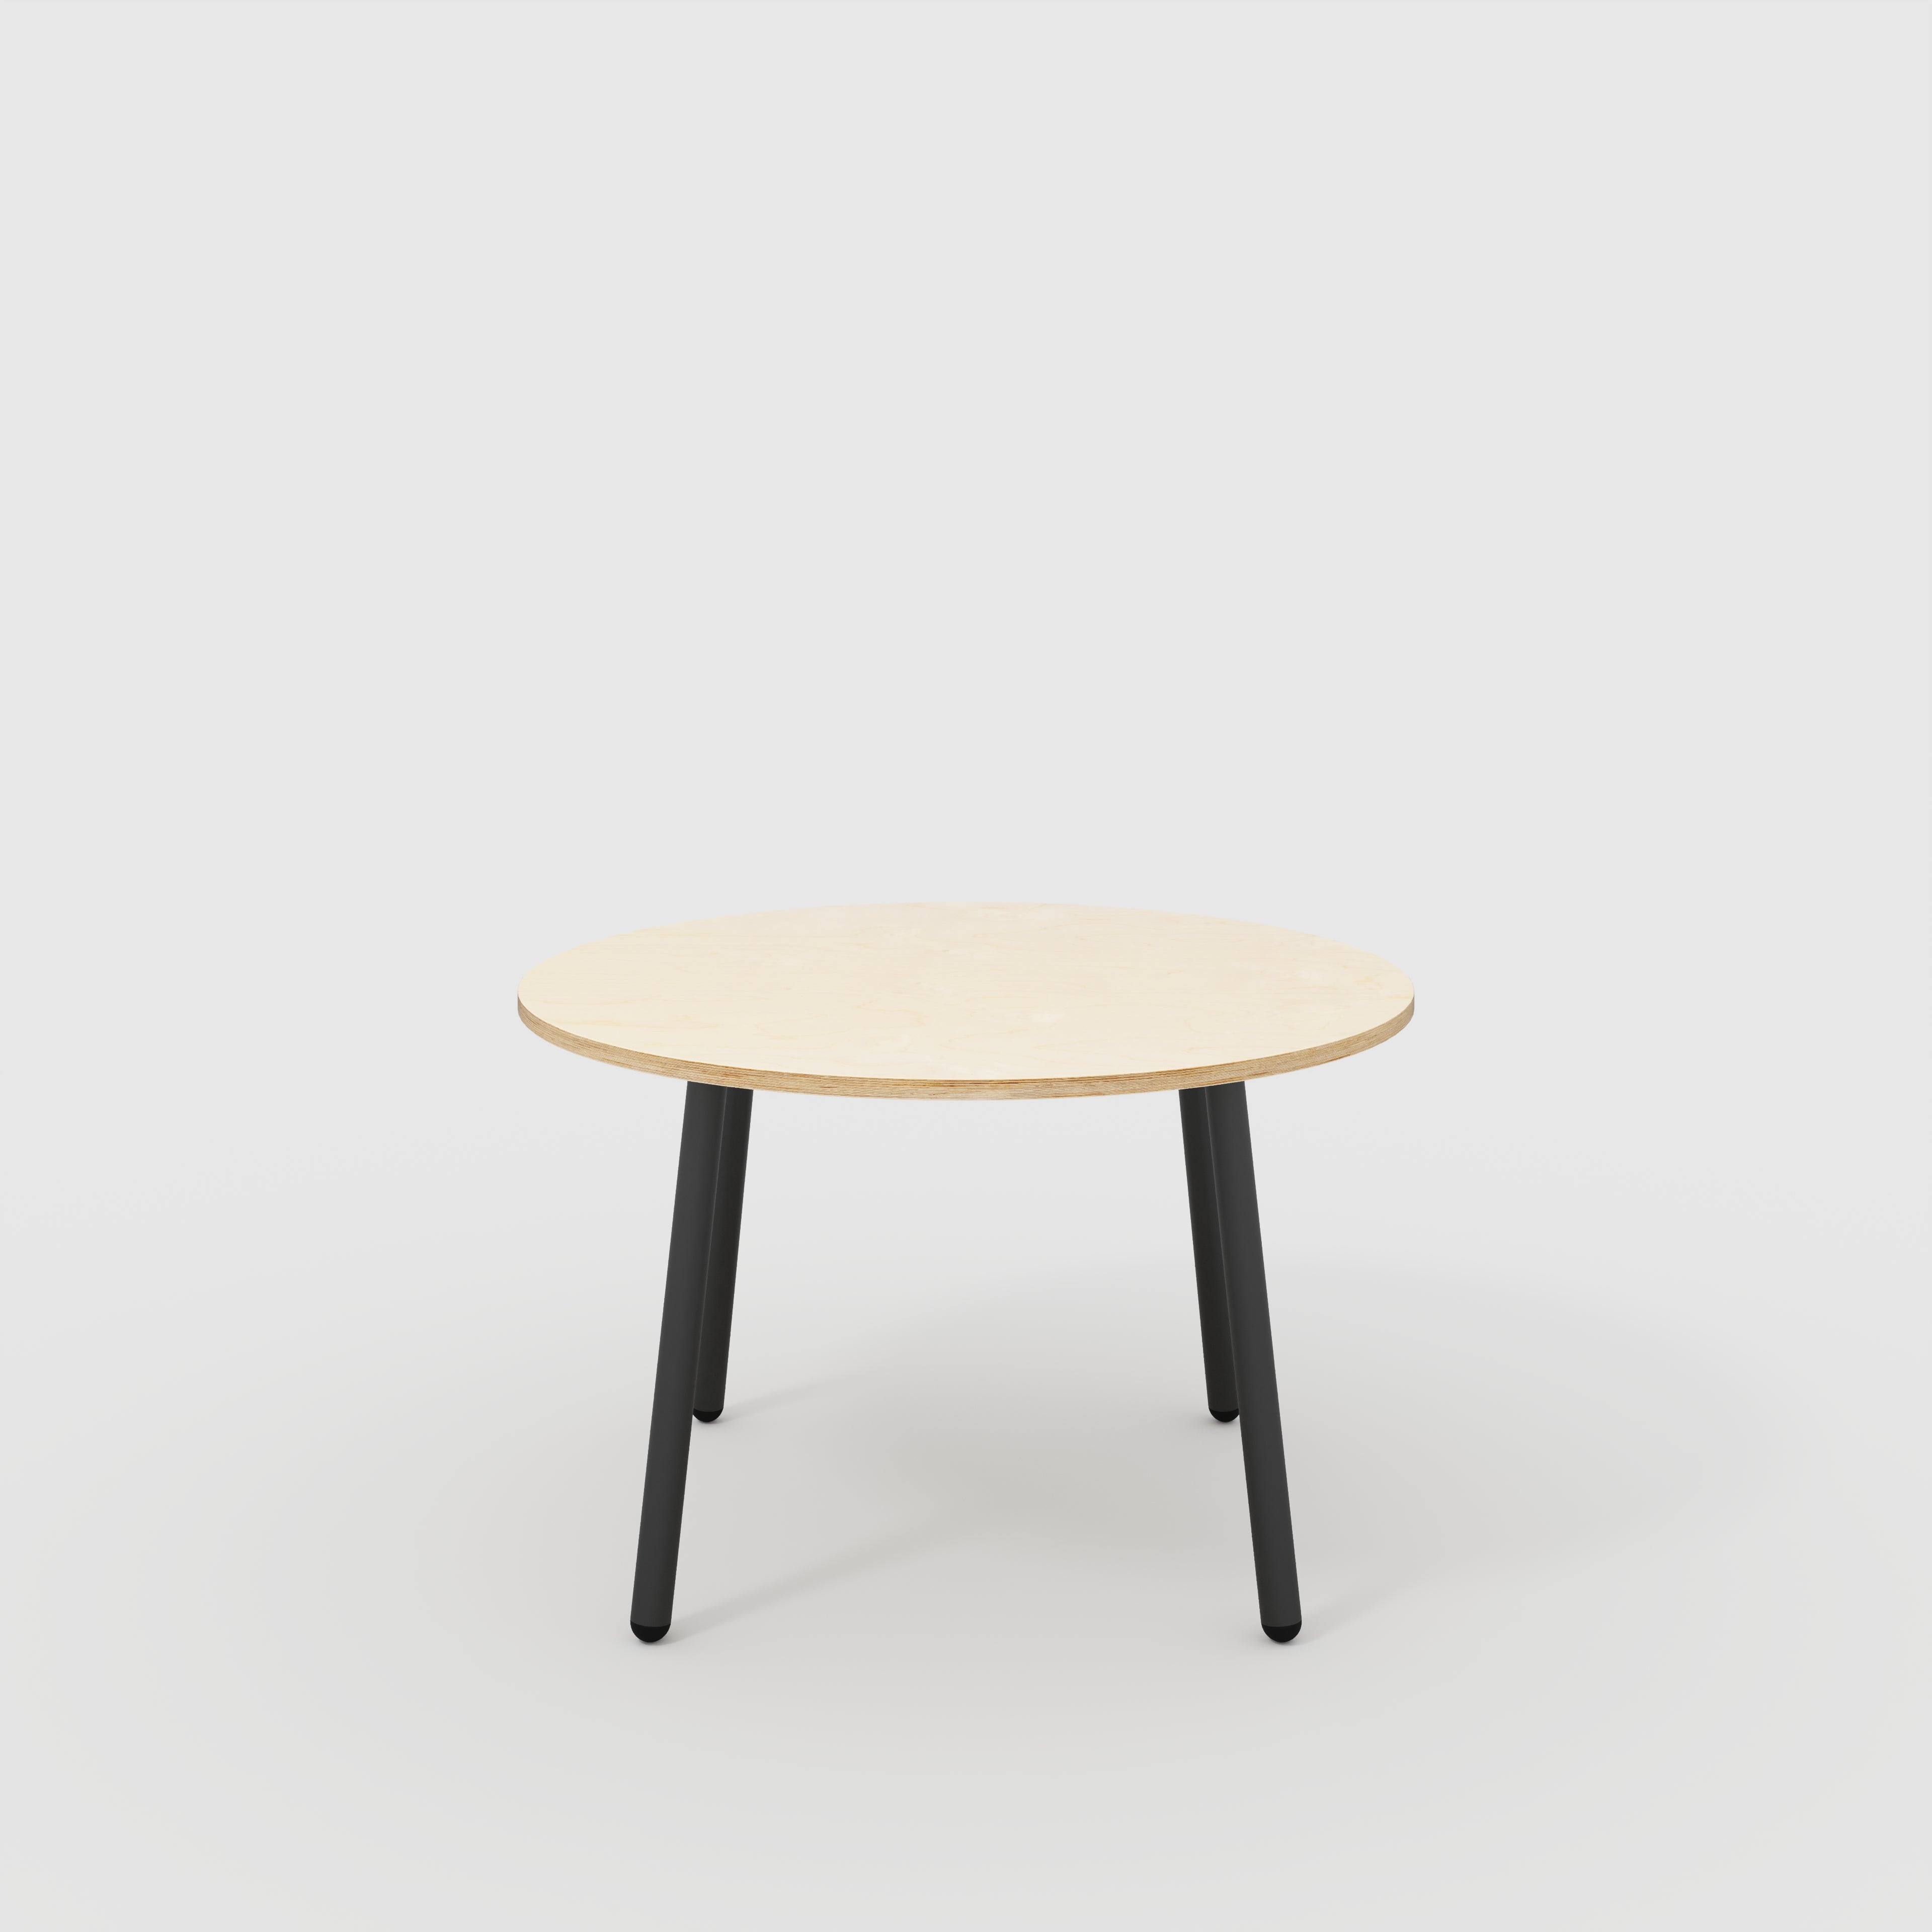 Round Table with Black Round Single Pin Legs - Plywood Birch - 1200(dia) x 750(h)